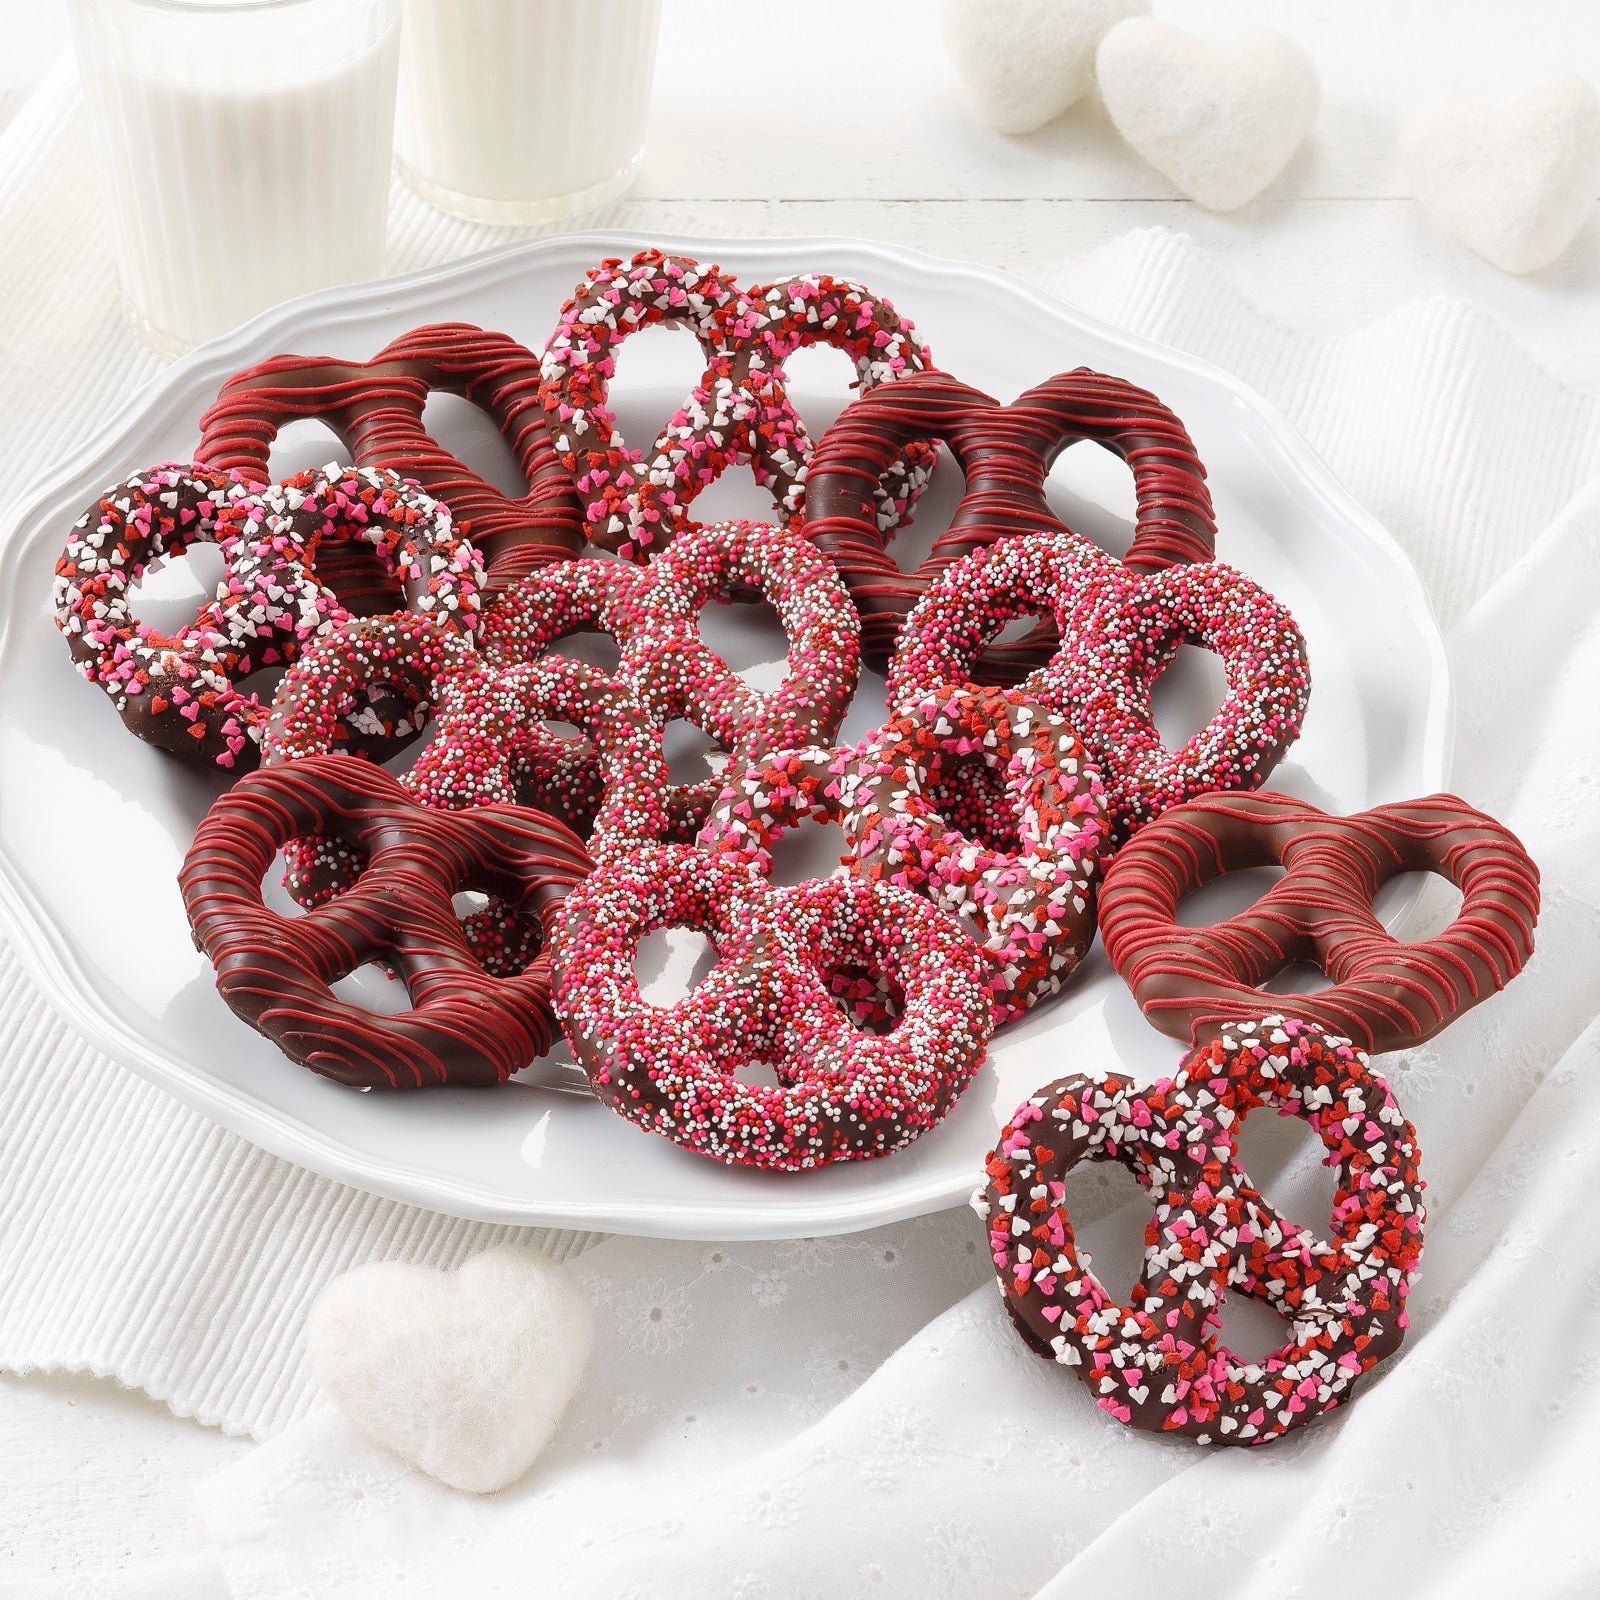 A dozen red and white Valentine's Day themed chocolate covered pretzels that are covered in sprinkles